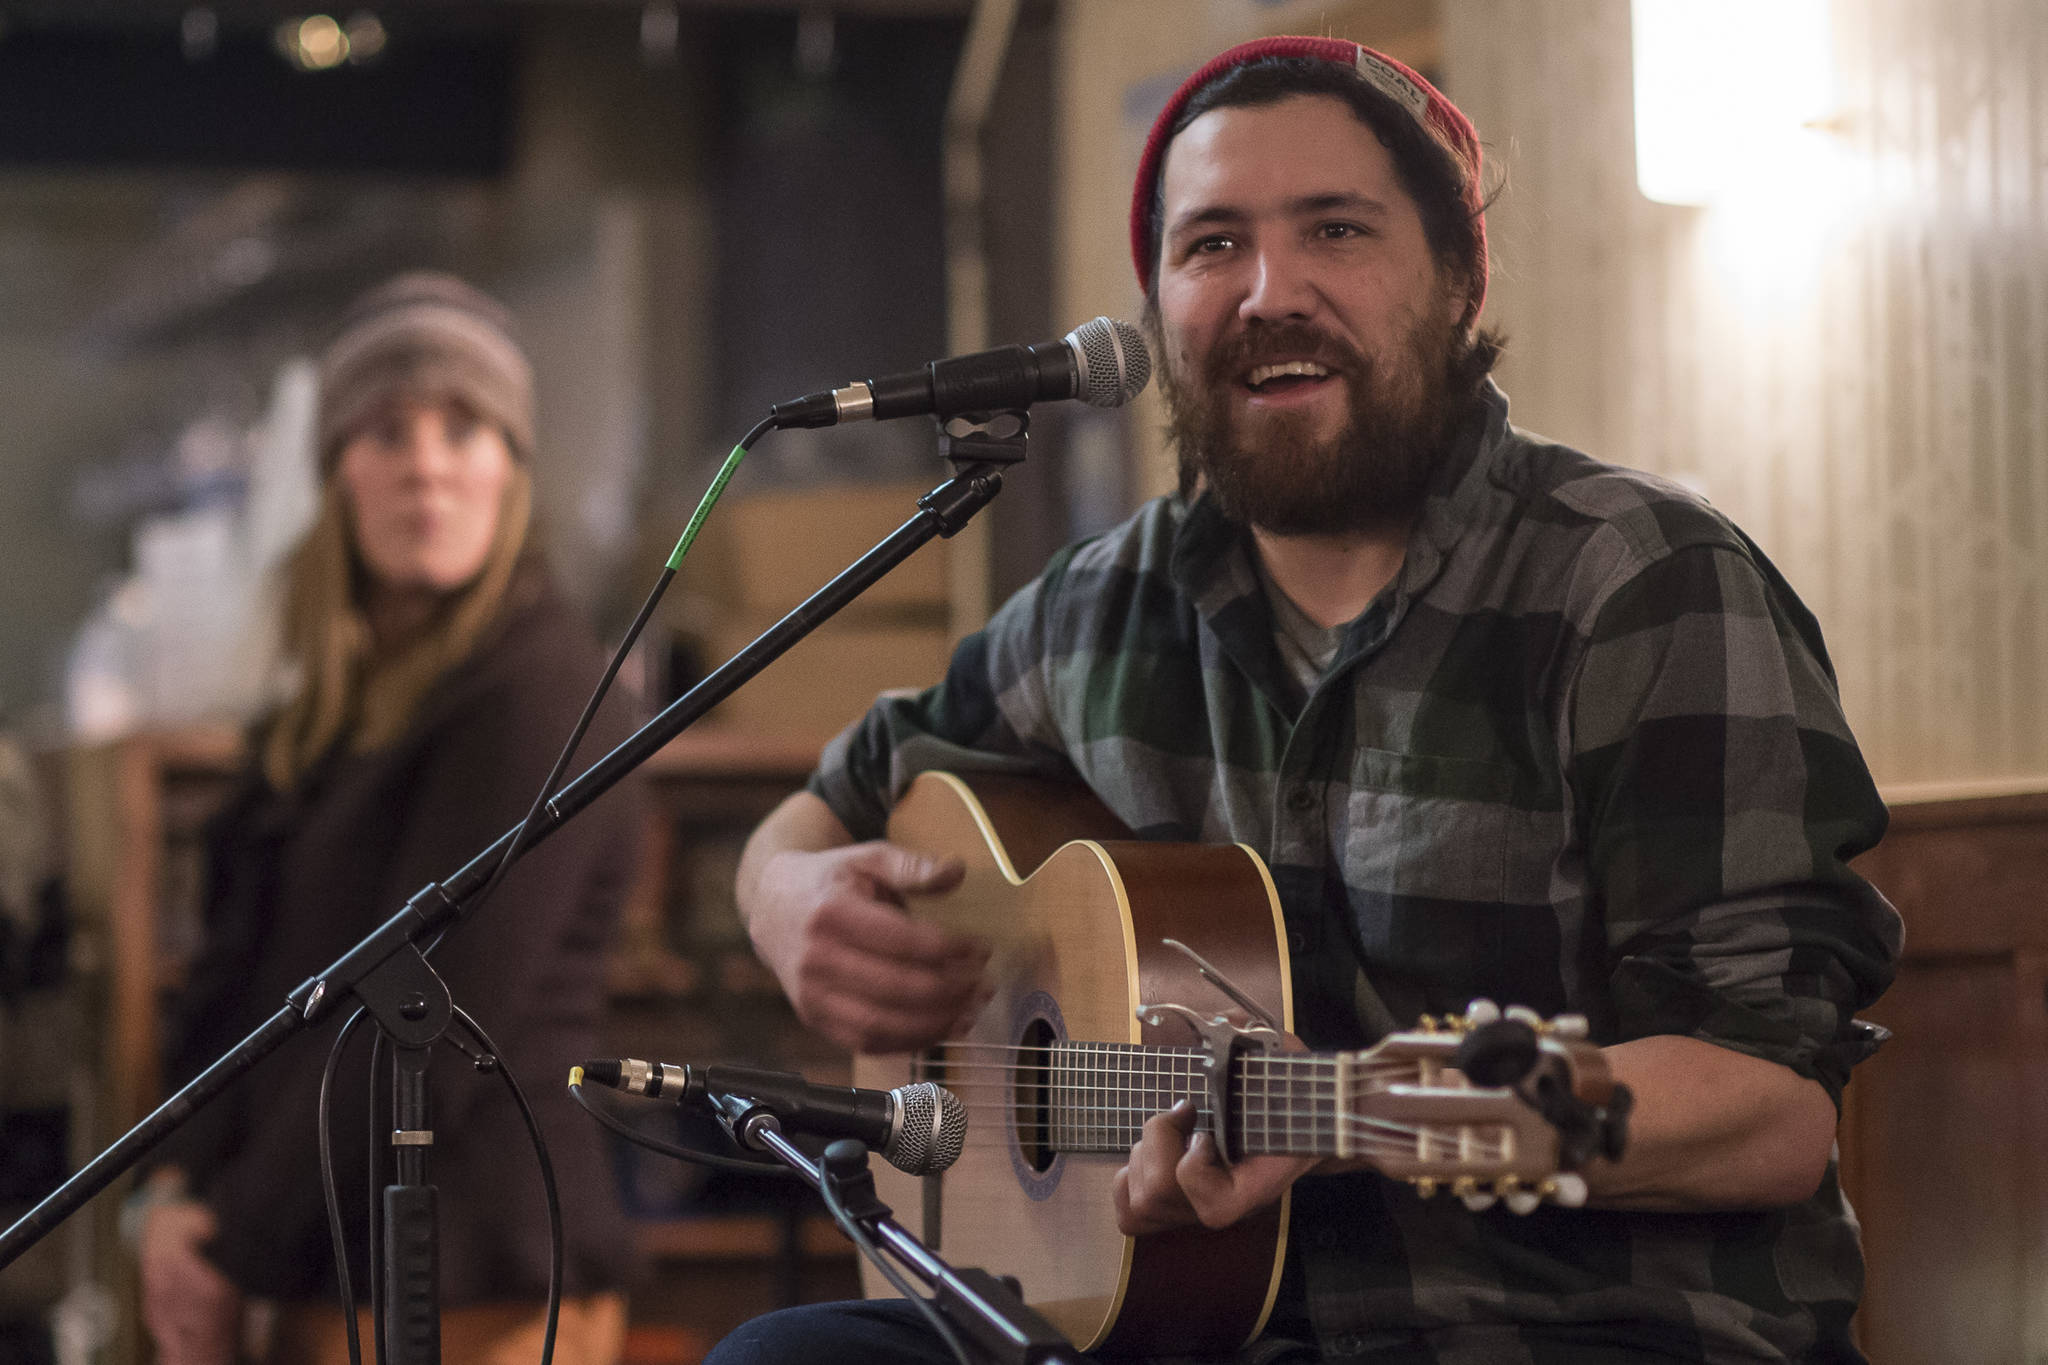 Daniel Firmin plays a two-song set during the Mountainside Open Mic & Art Night at The Rookery on Oct. 31, 2018. (Michael Penn | Juneau Empire File)